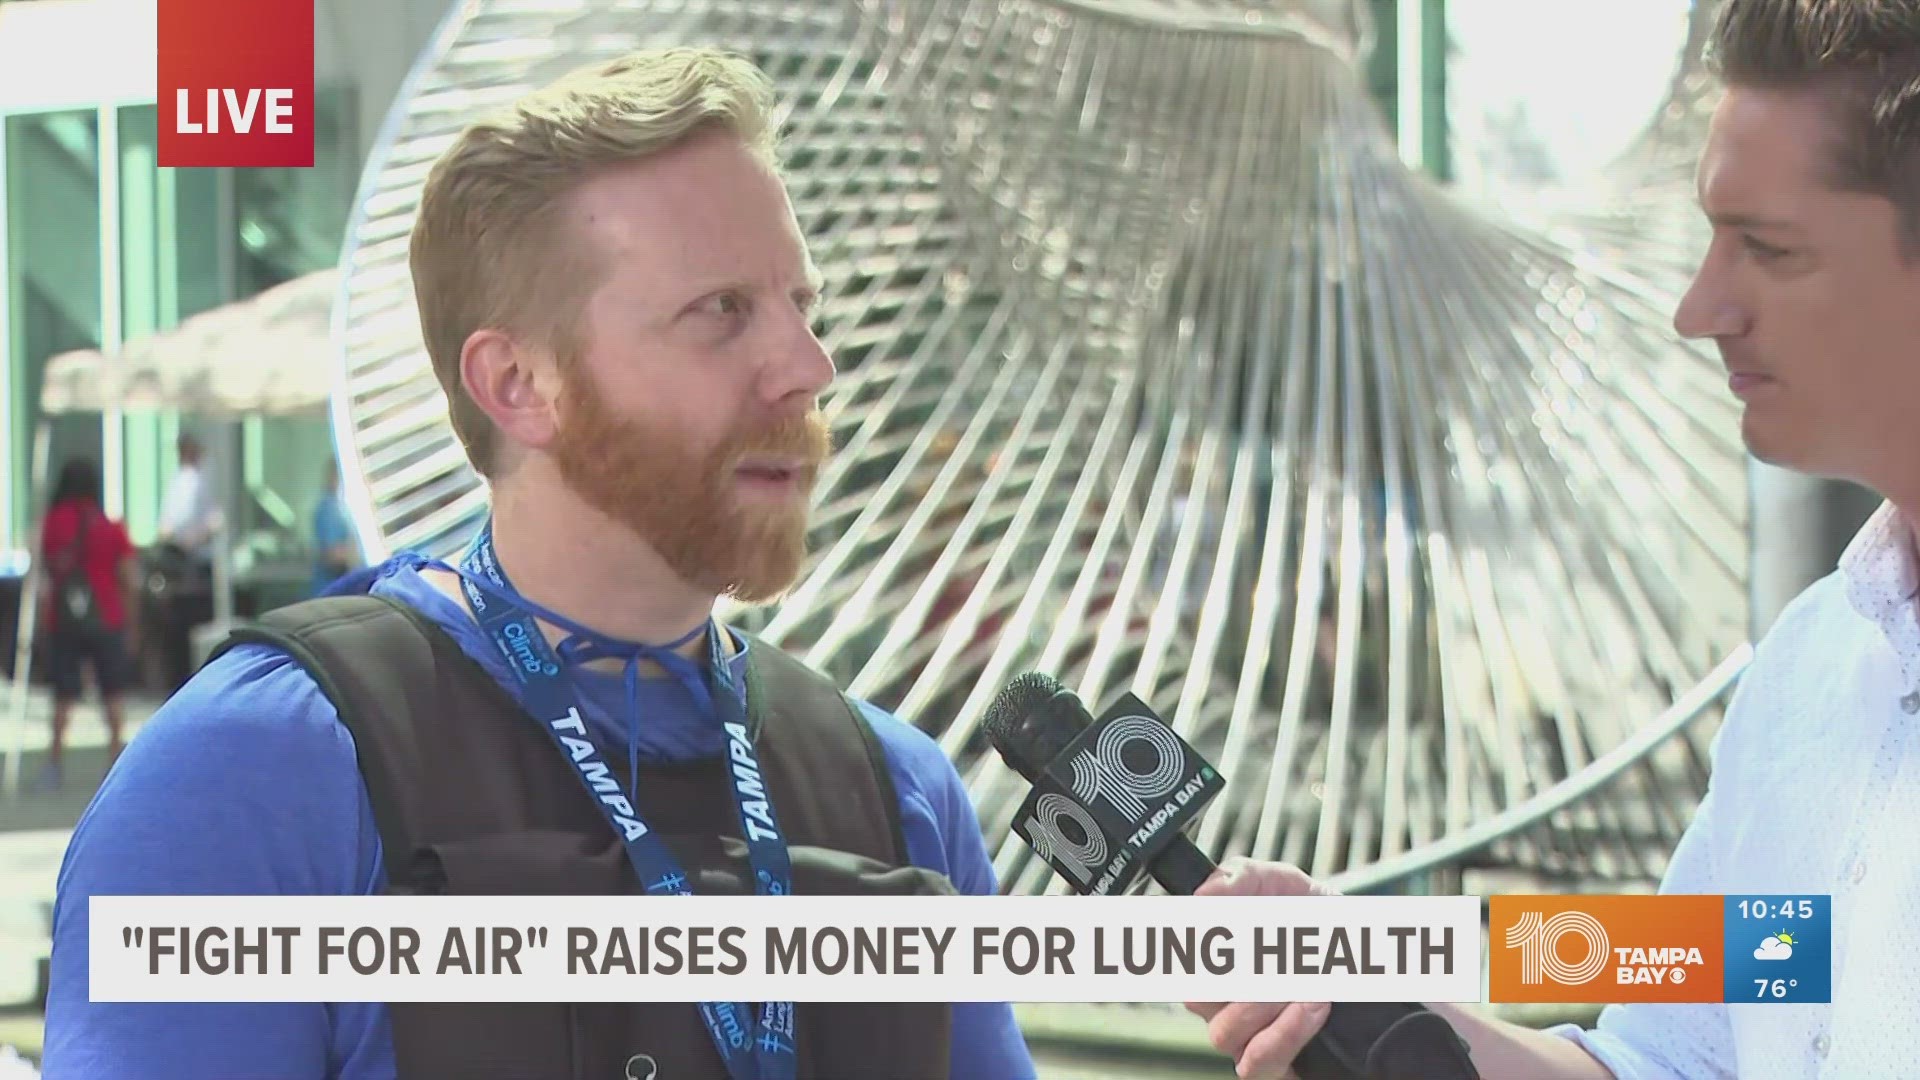 The Fight For Air Climb is one of the American Lung Association's signature fundraising events.